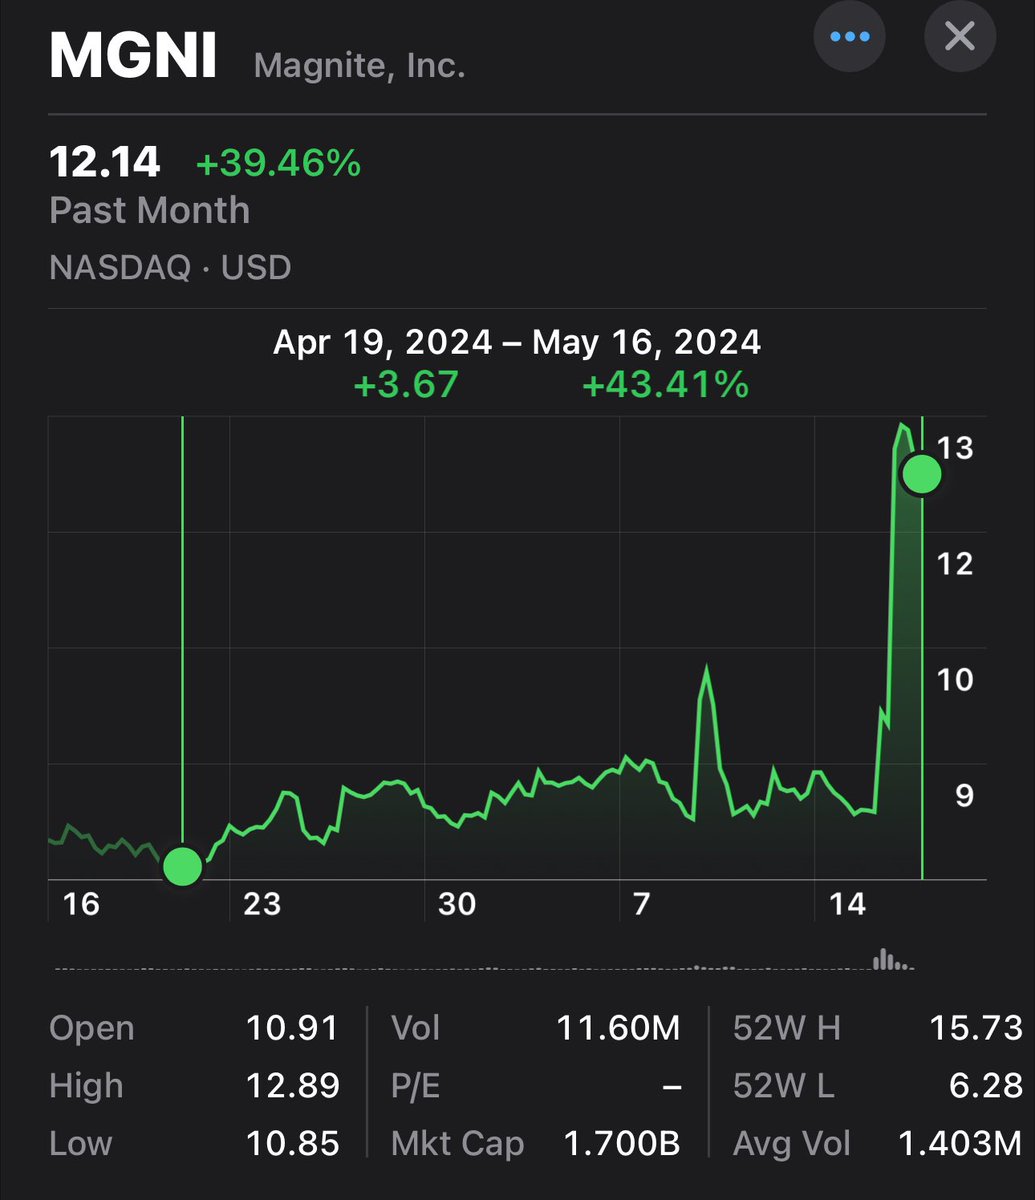 $MGNI crushing it after good earnings and big news with $NFLX $MGNI leads in CTV, I wanted exposure. Good year for adtech. I trimmed a couple Jan25Cs at +100% after sniping the bottom when many were bearish Join our community Use code 'LOGIC' for 10% off whop.com/stocktalk